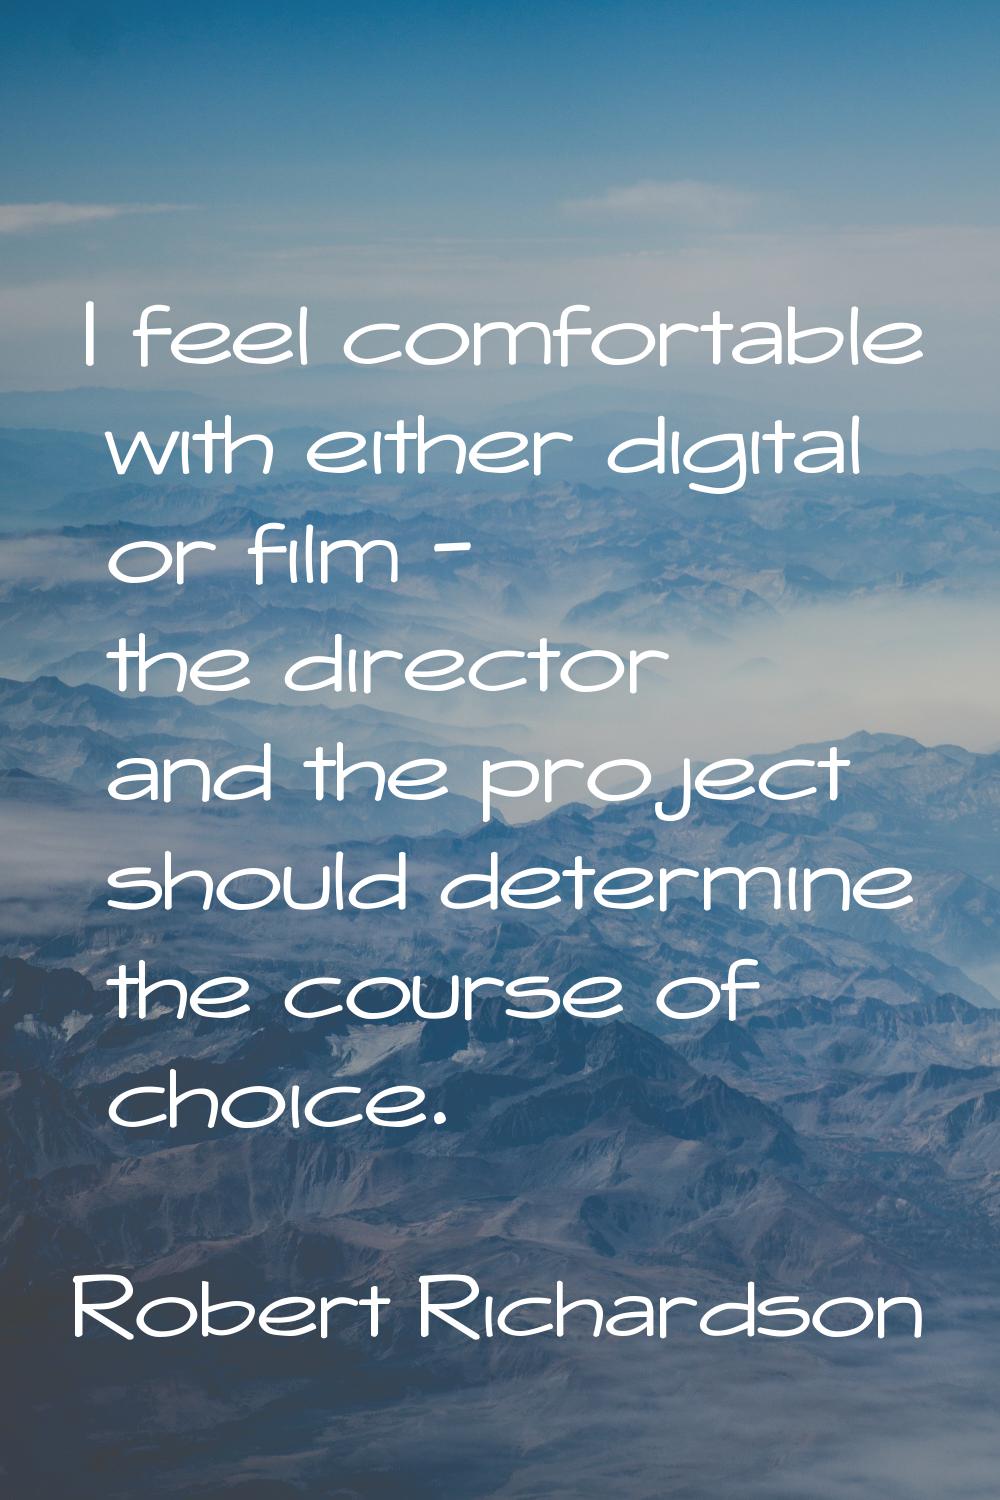 I feel comfortable with either digital or film - the director and the project should determine the 